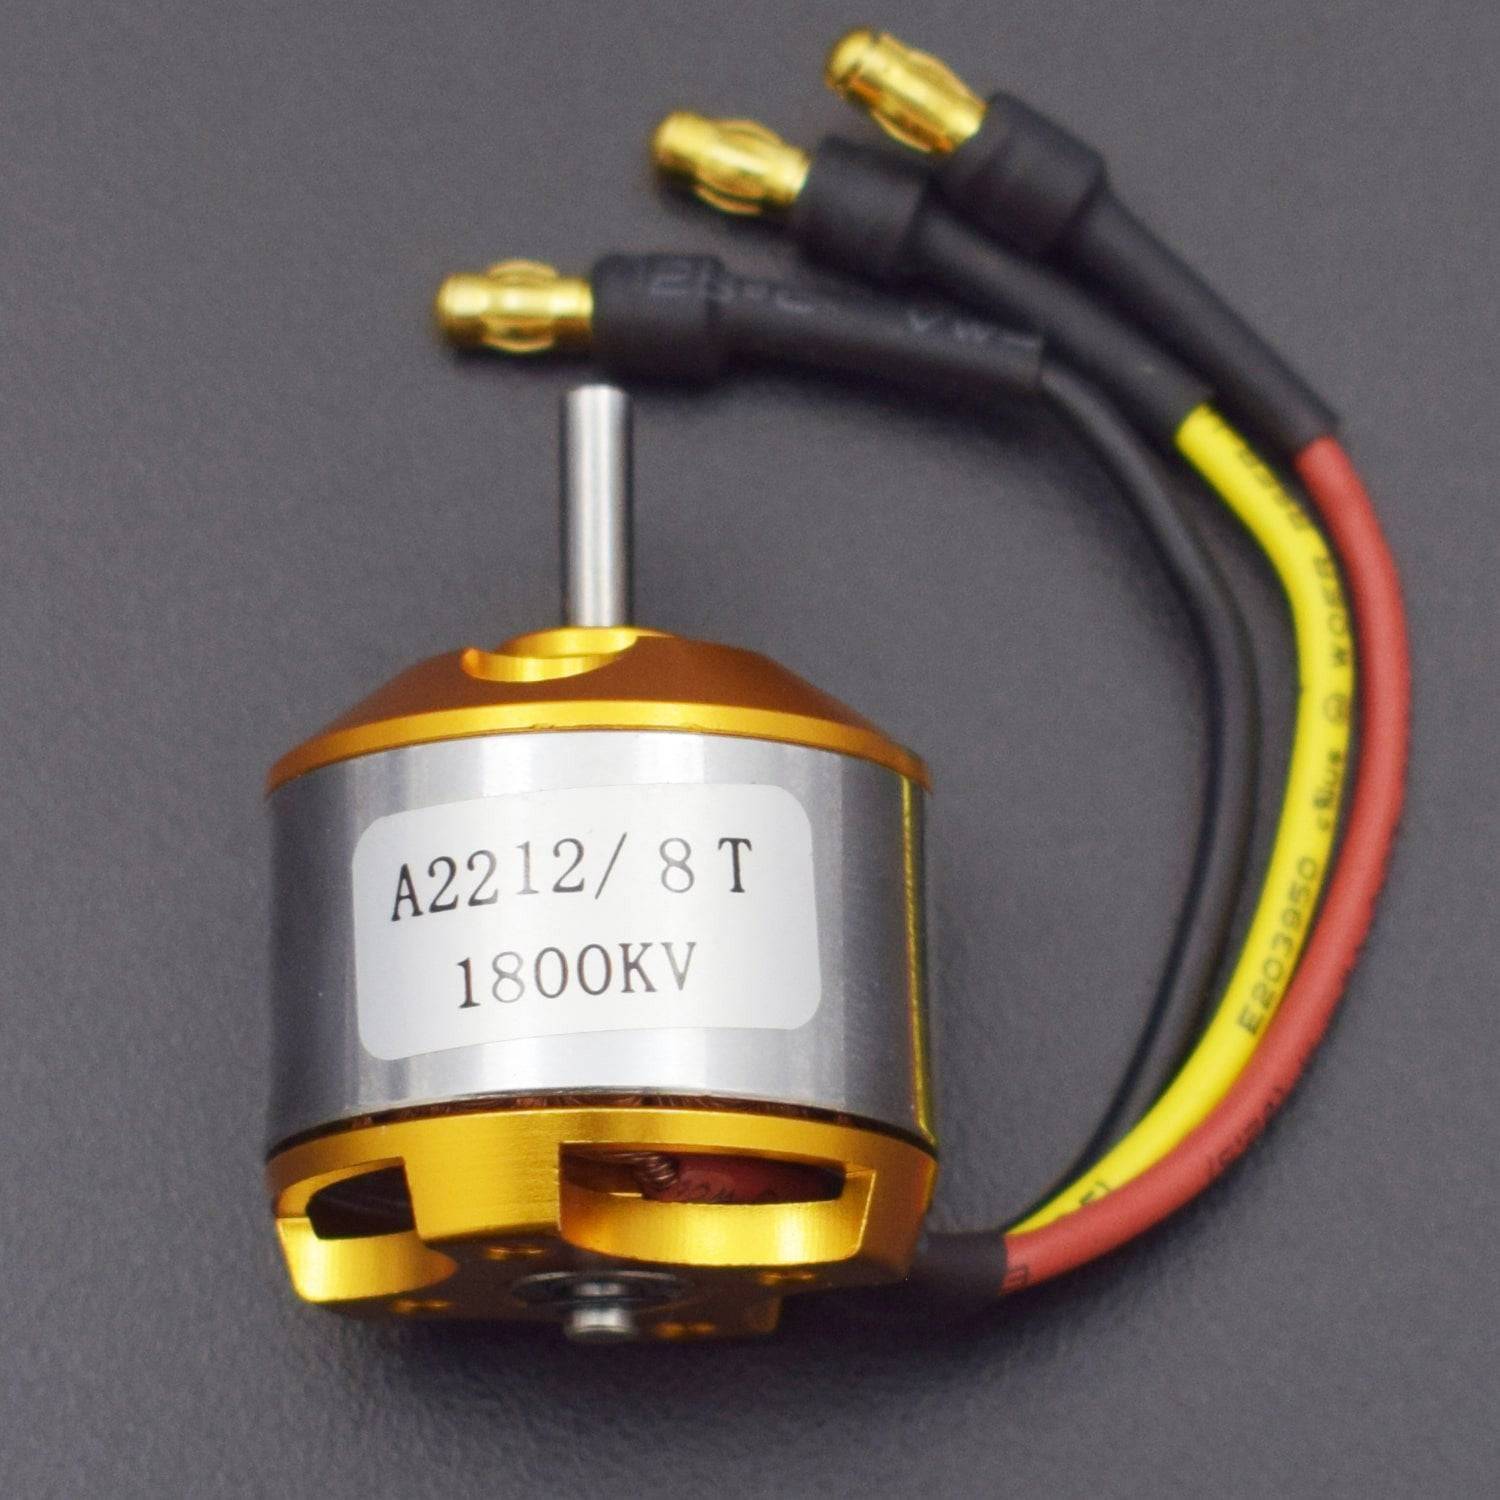 A2212/13T 1800KV BLDC Airplane Out runner Brushless Motor - RC026 - REES52